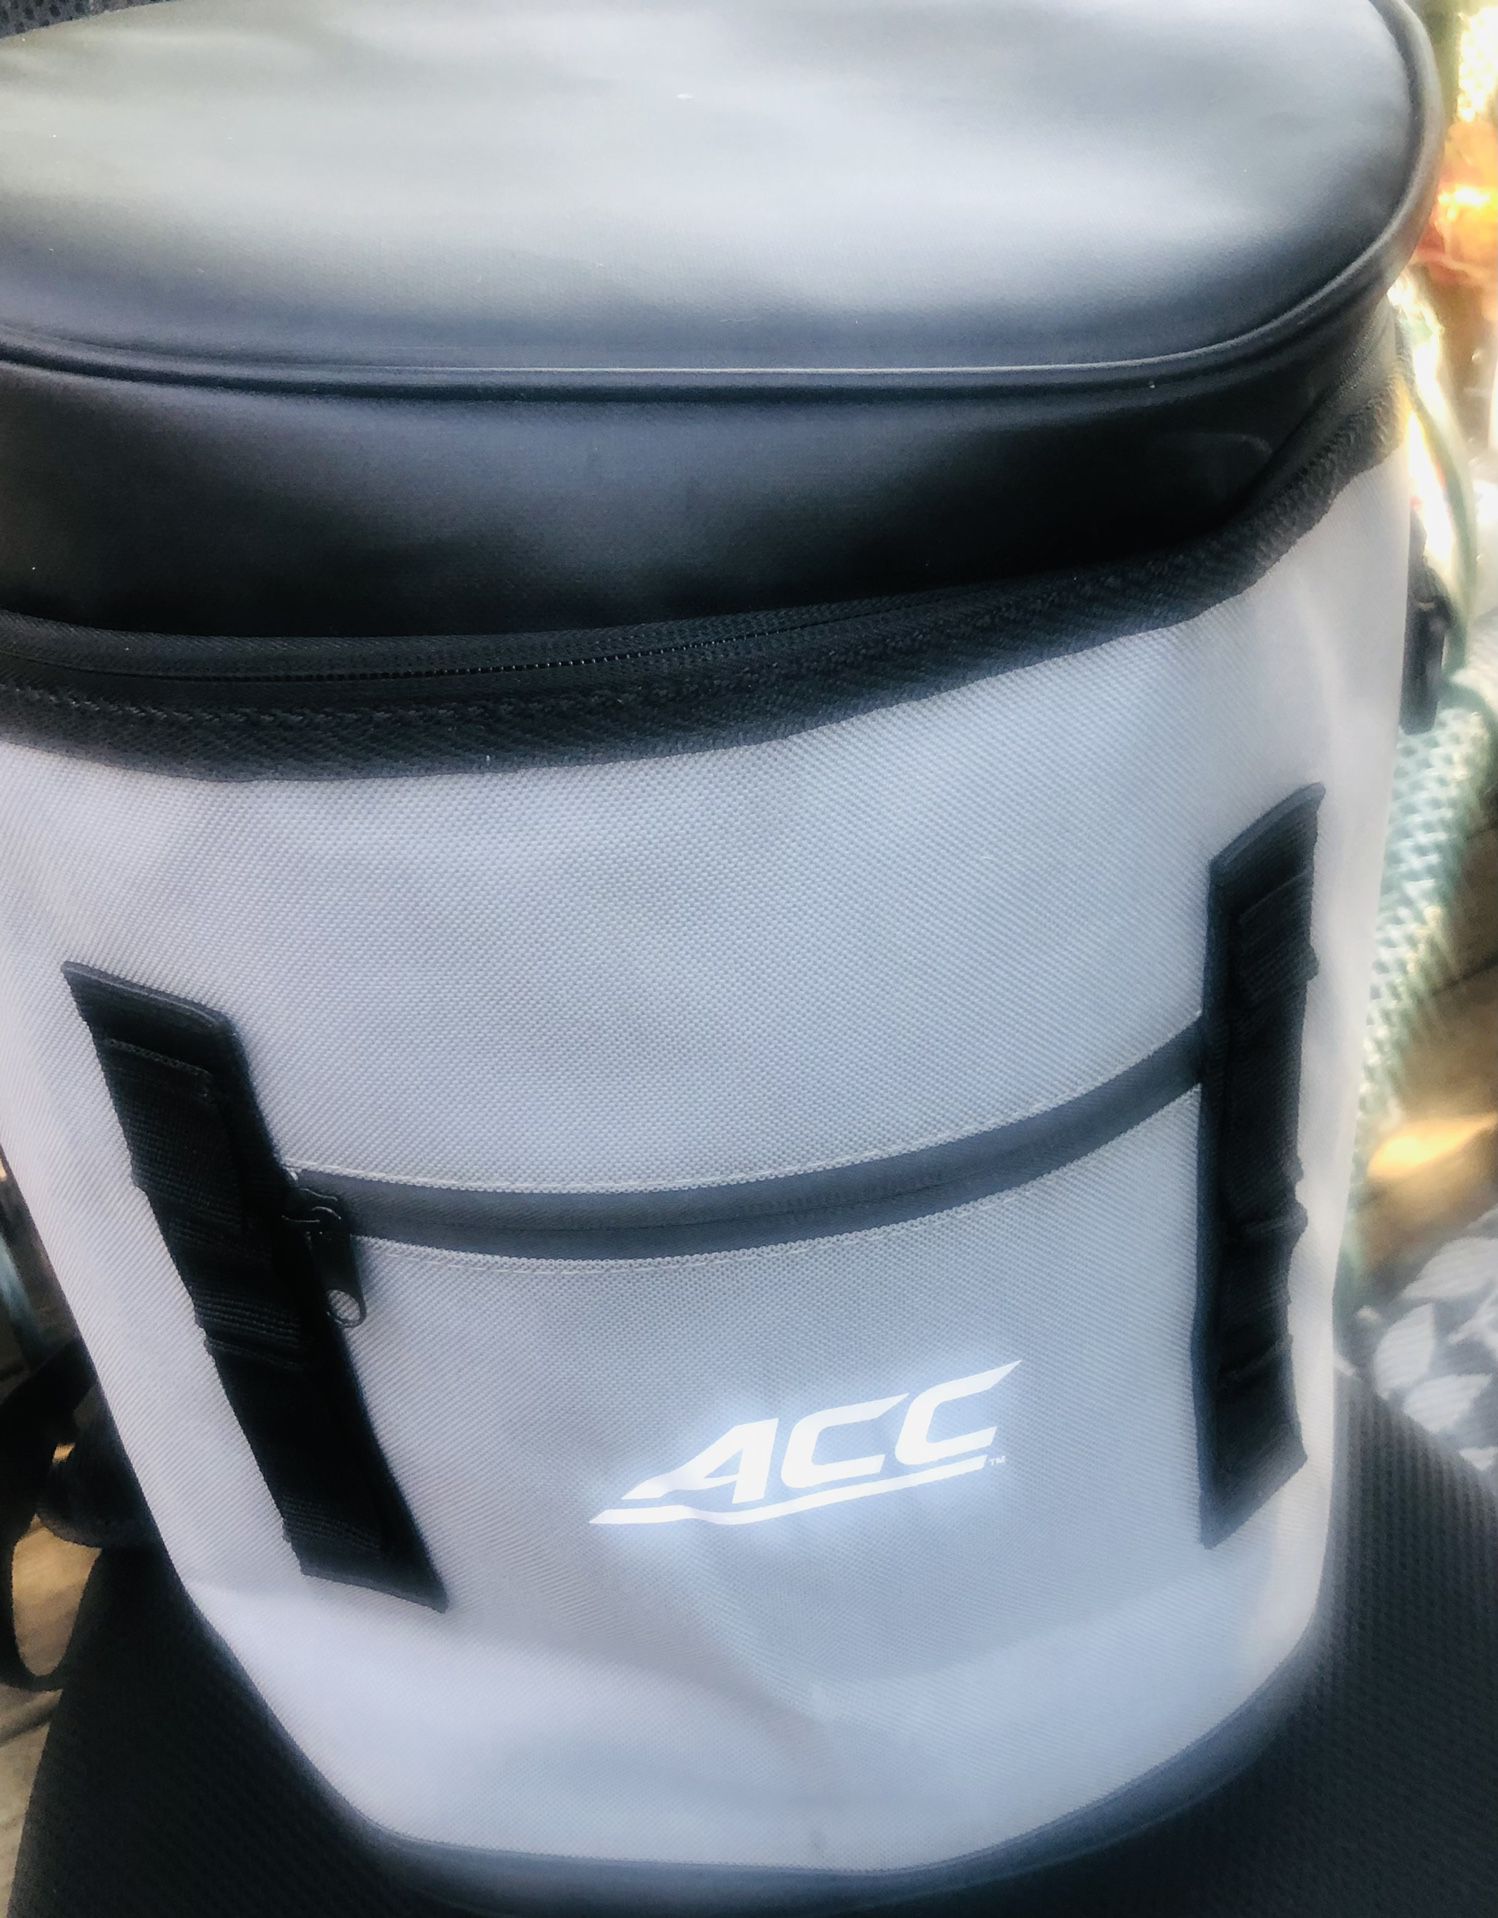 ACC  Backpack  Insulated  Cooler  Holds 20  Cans  Pop Beer Ect